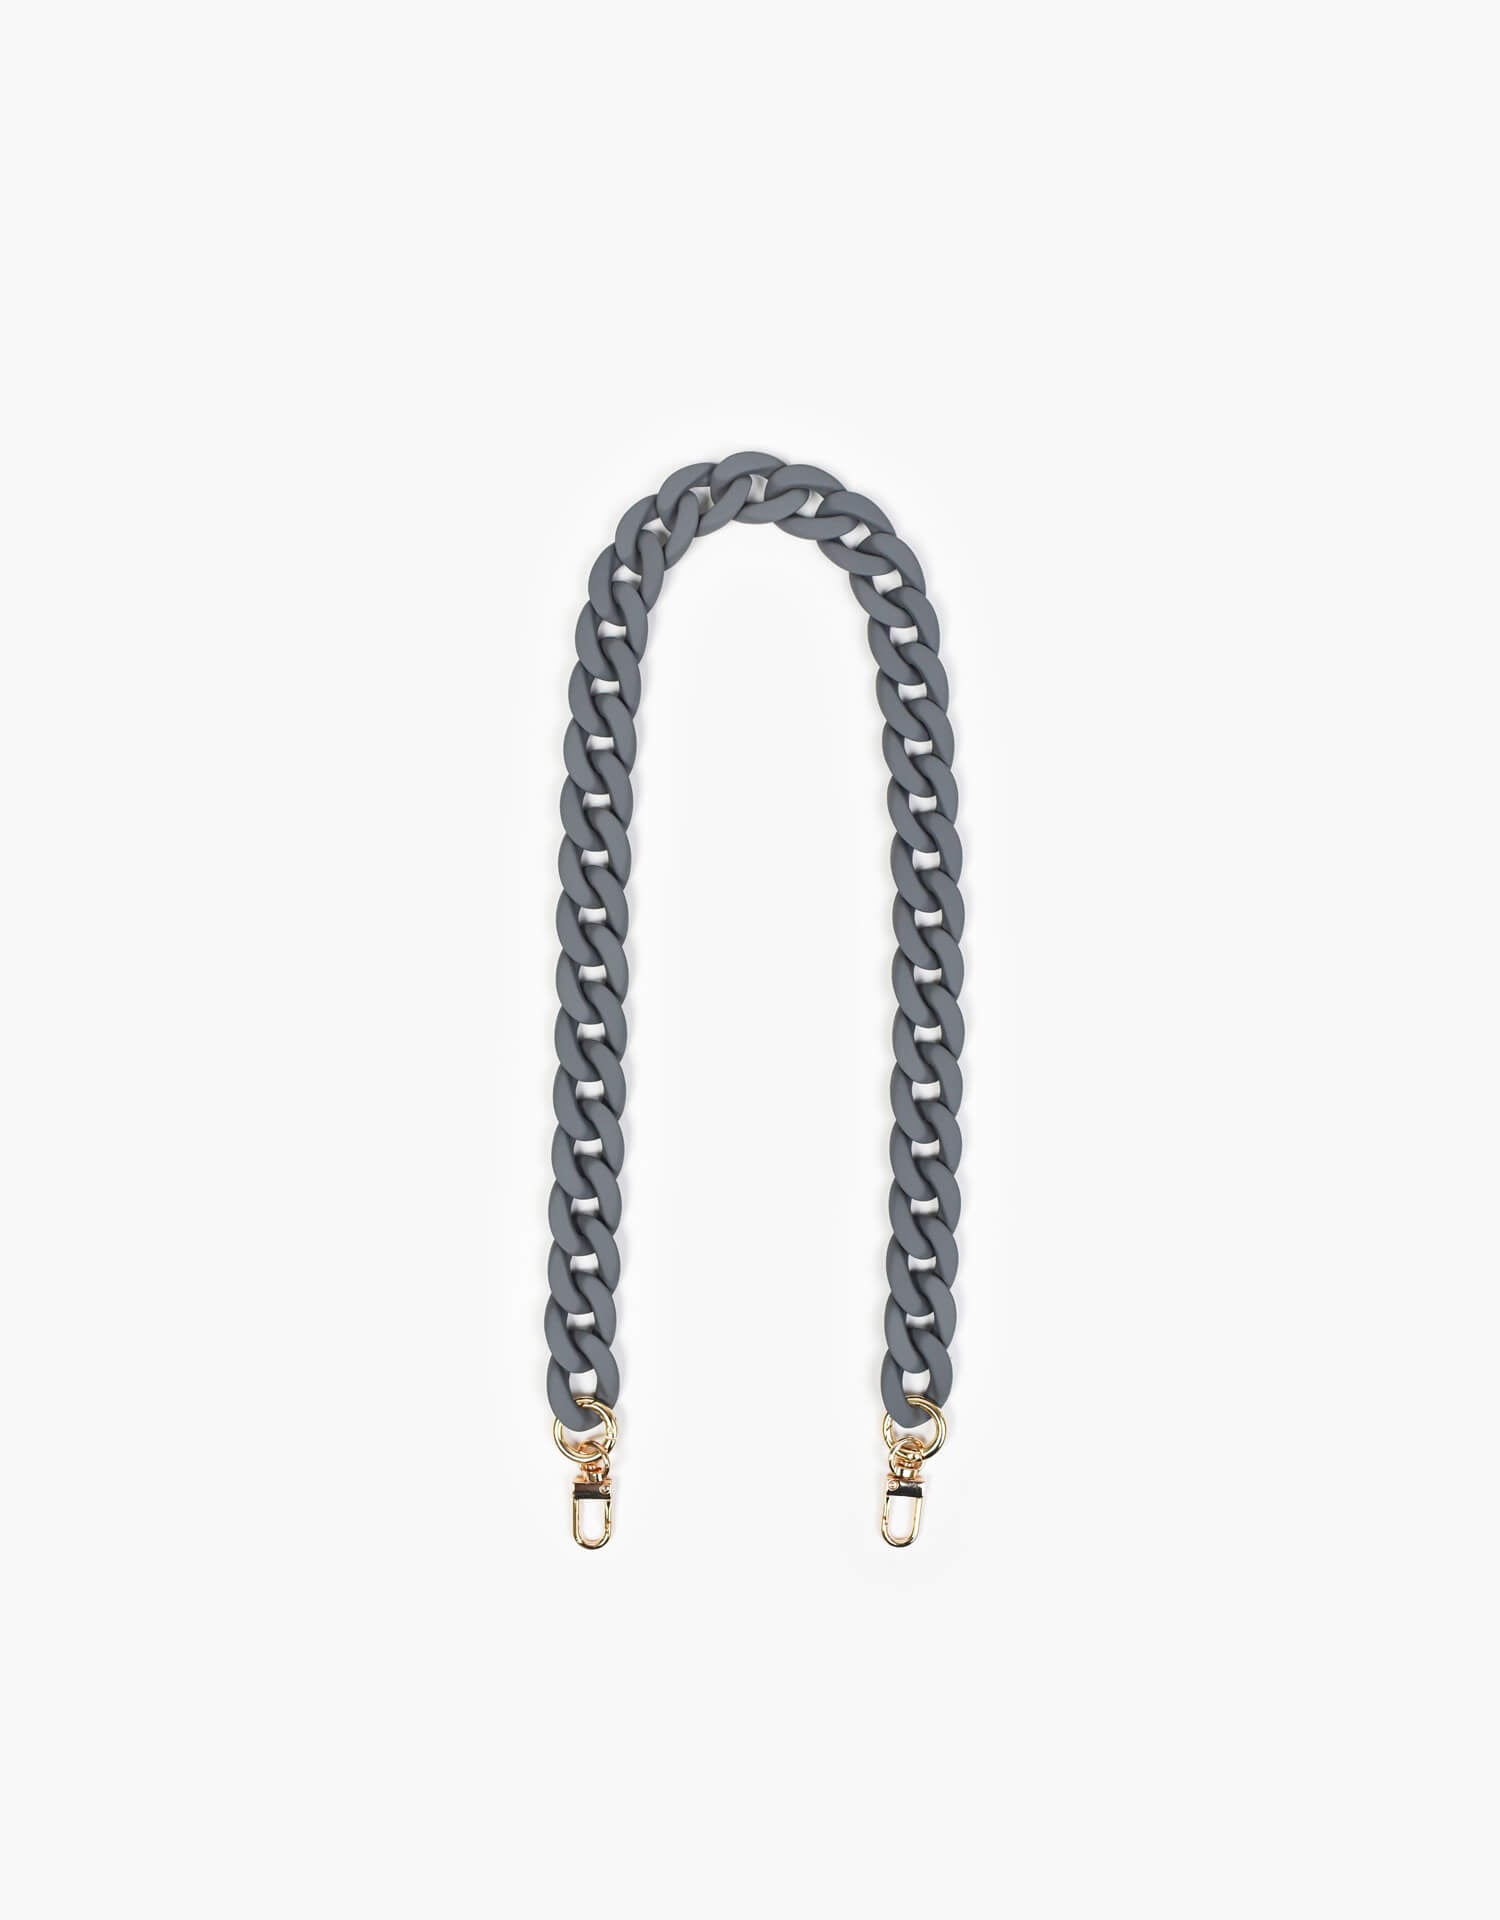 The 'CA' Coated Chain Strap